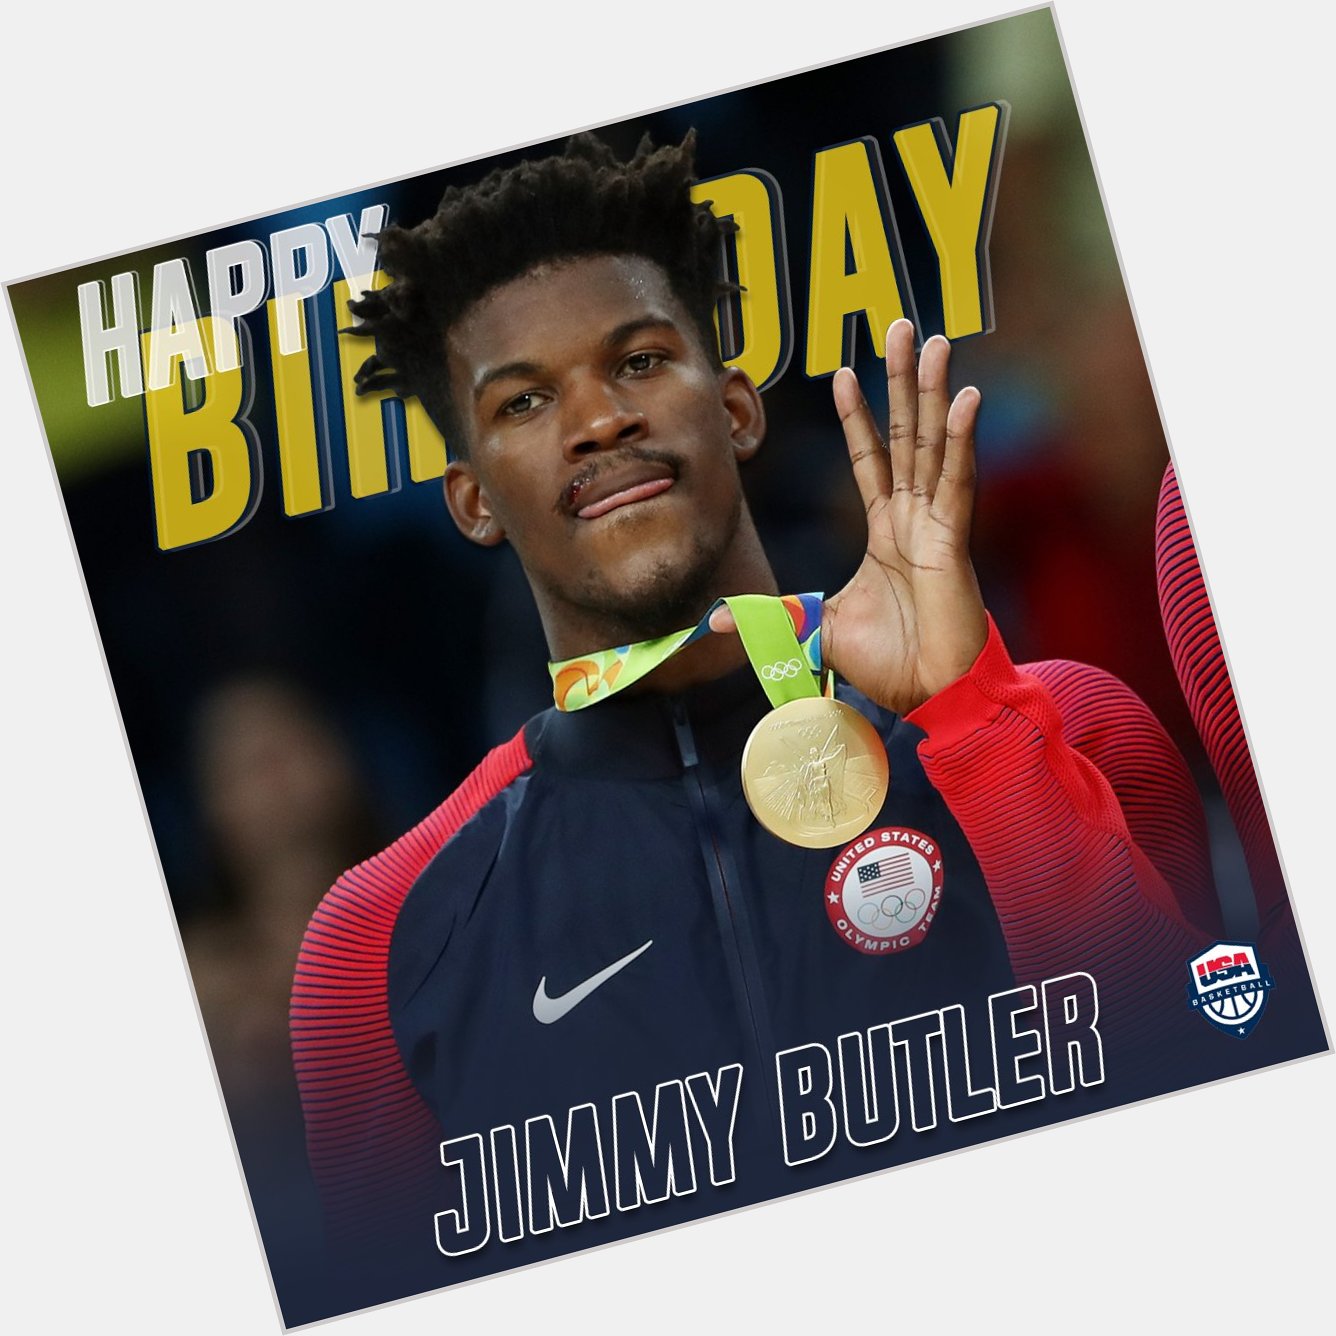 Wishing a happy birthday to Jimmy Butler & Larry Brown! Be easy, fellas.   